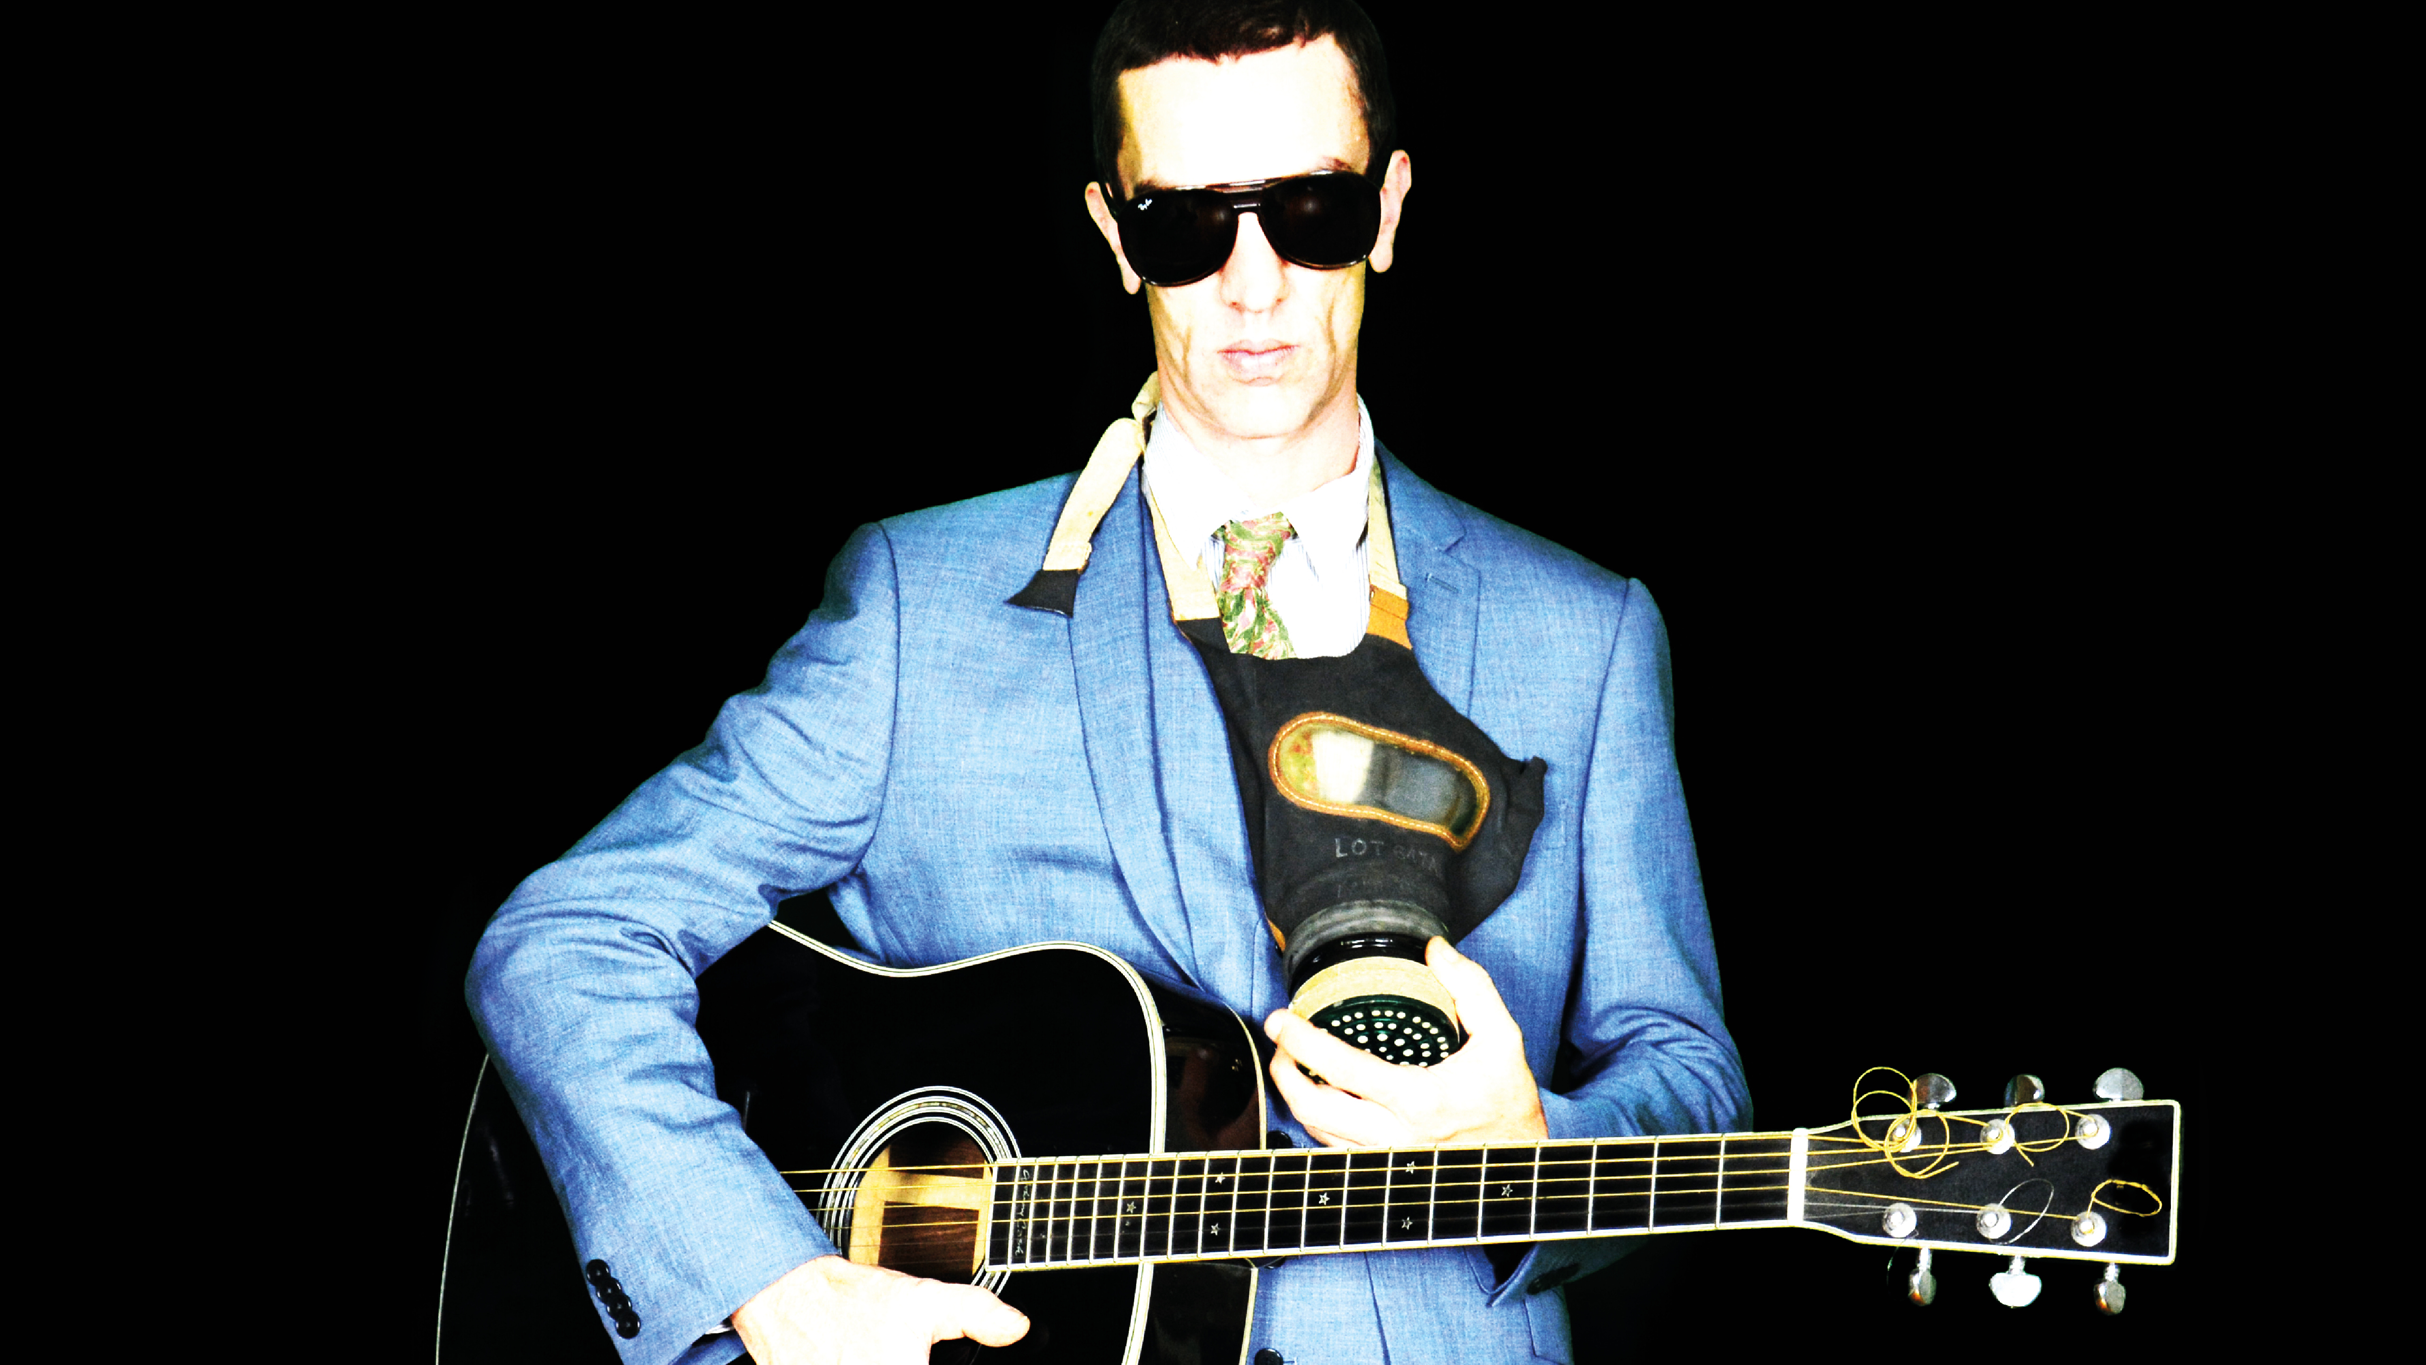 Richard Ashcroft  - Dalby Forest in Yorkshire promo photo for Live Nation presale offer code